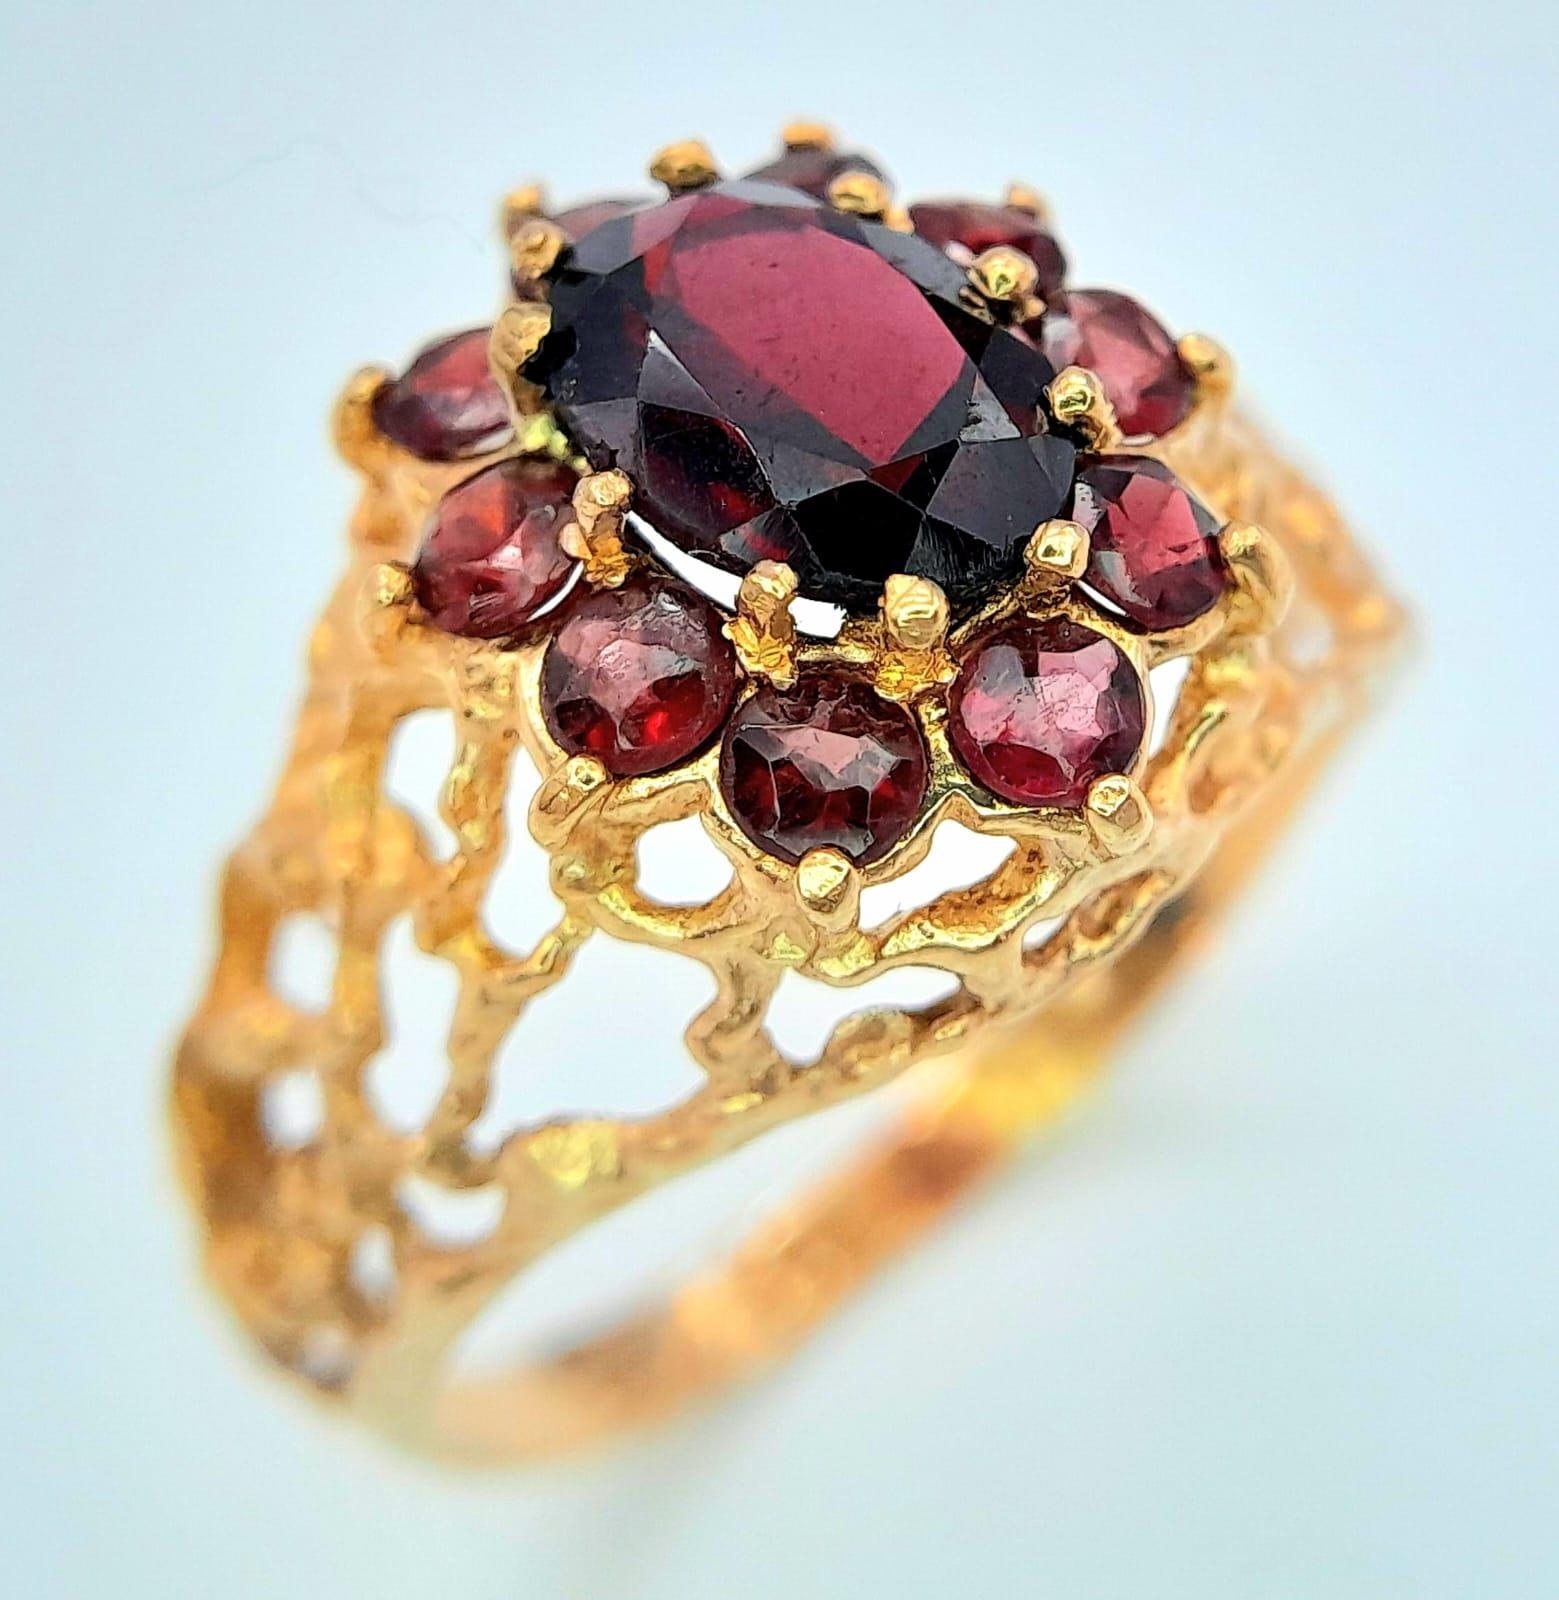 A vintage oval cluster garnet 9ct gold ring surrounded by a halo of bright red garnets in a